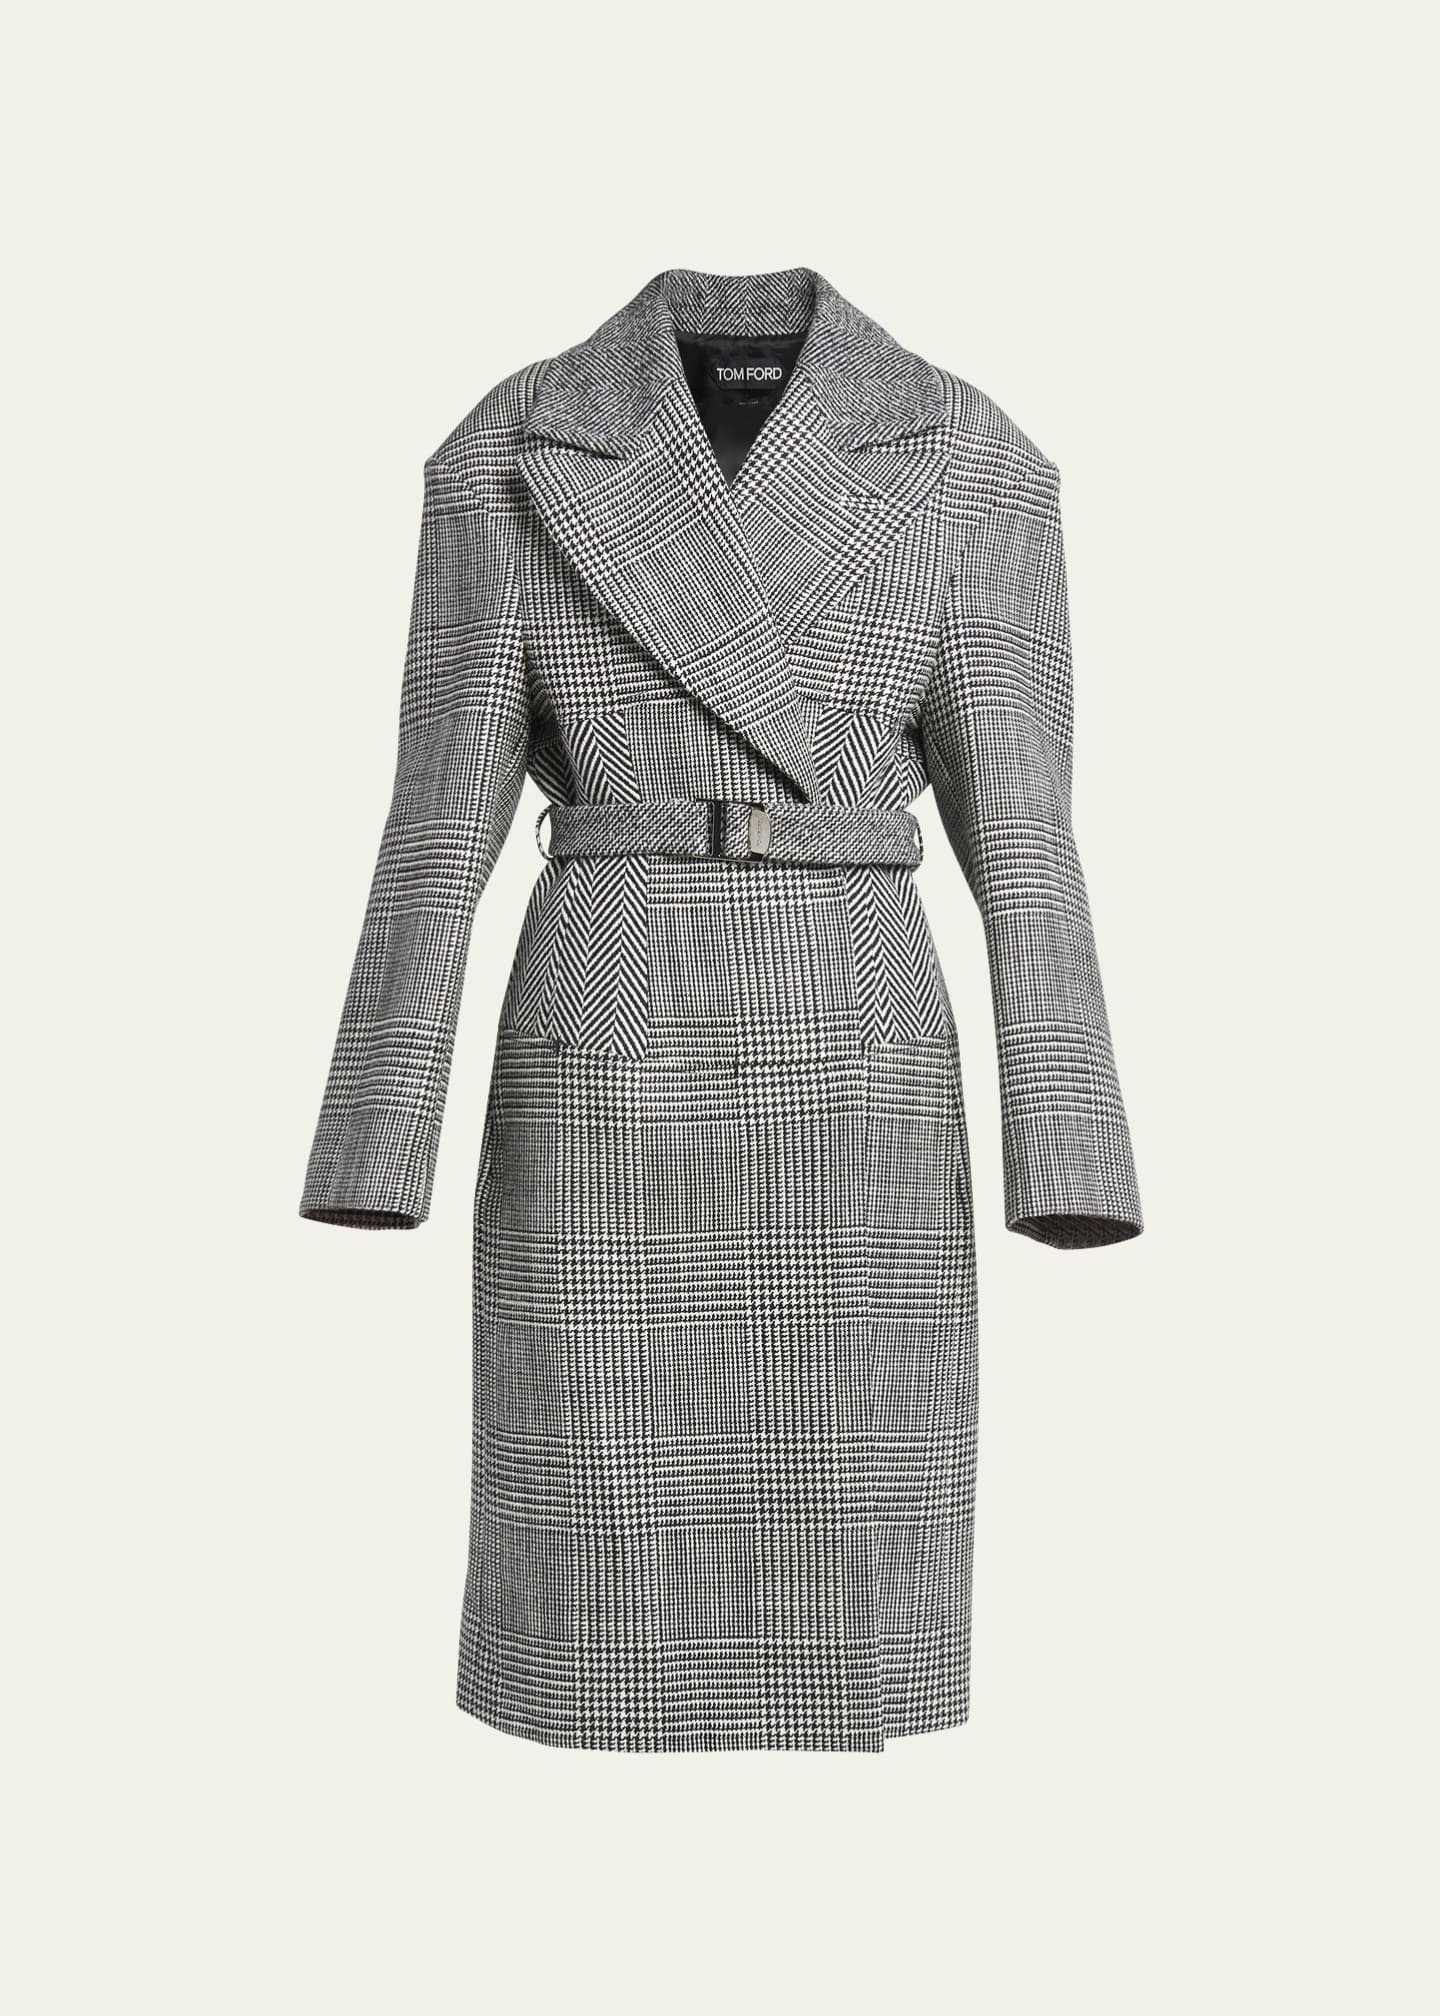 TOM FORD Belted Patchwork Prince Of Wales Wool Overcoat - Bergdorf Goodman